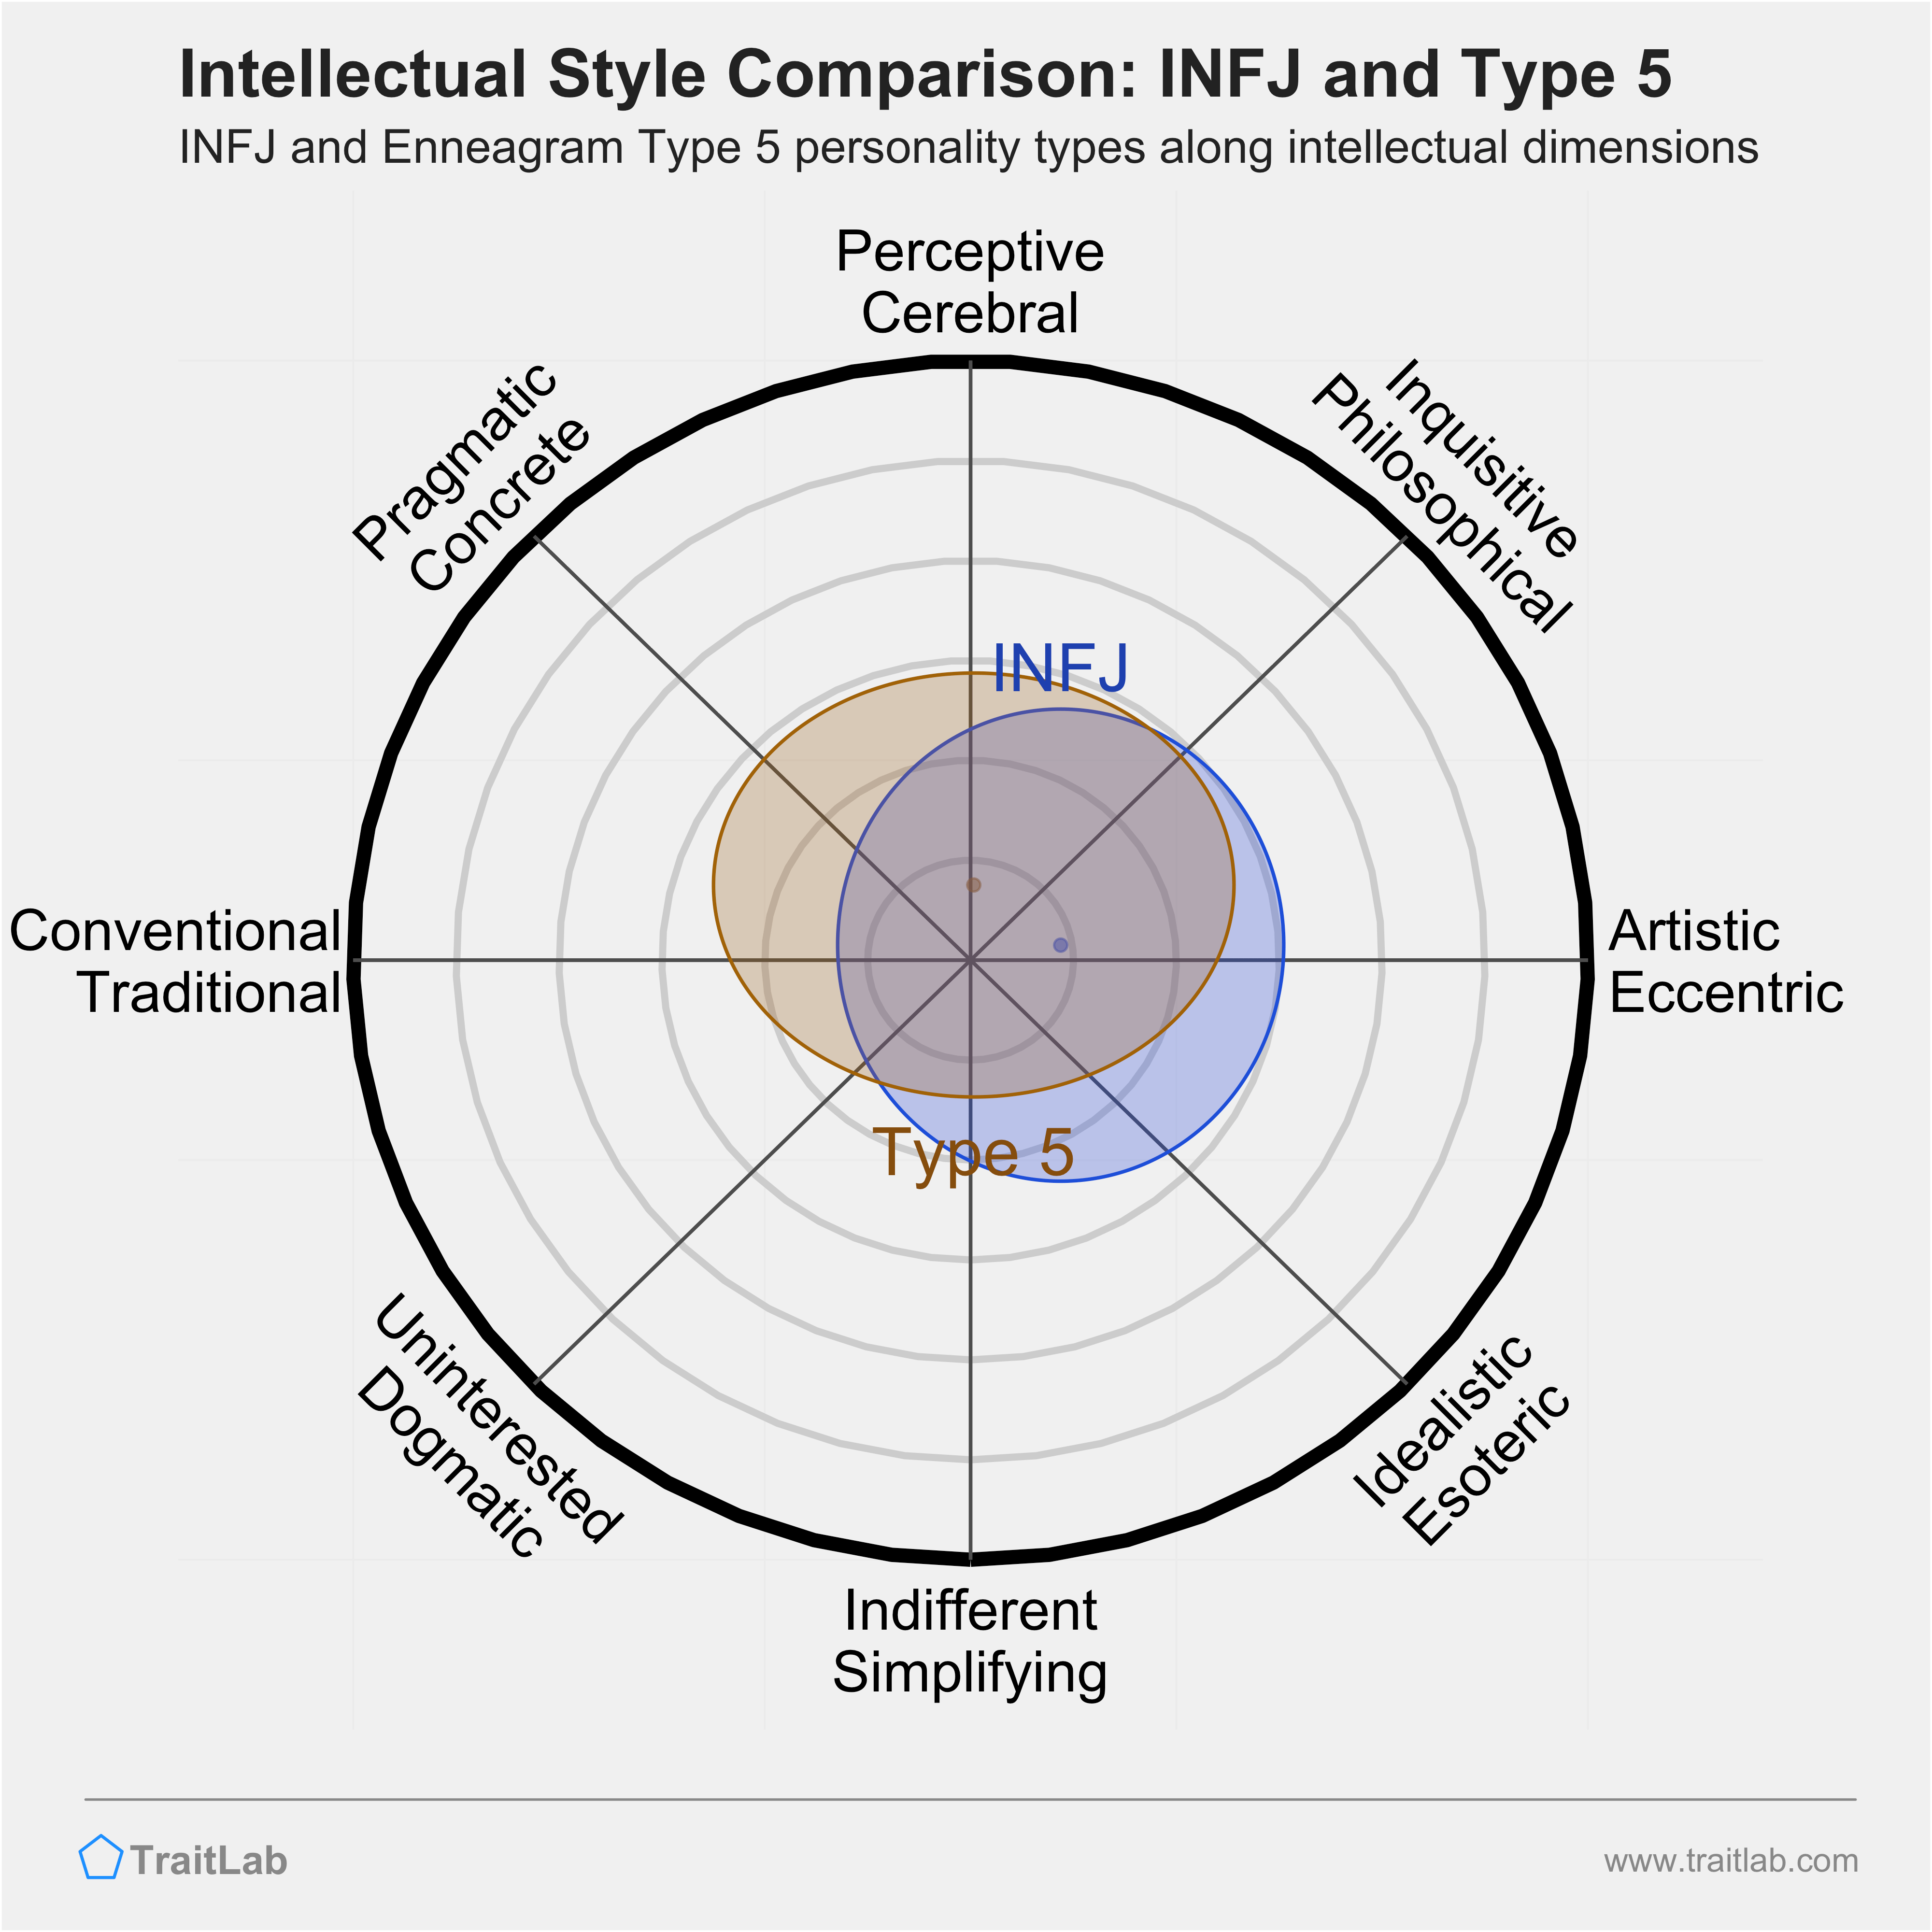 INFJ and Type 5 comparison across intellectual dimensions